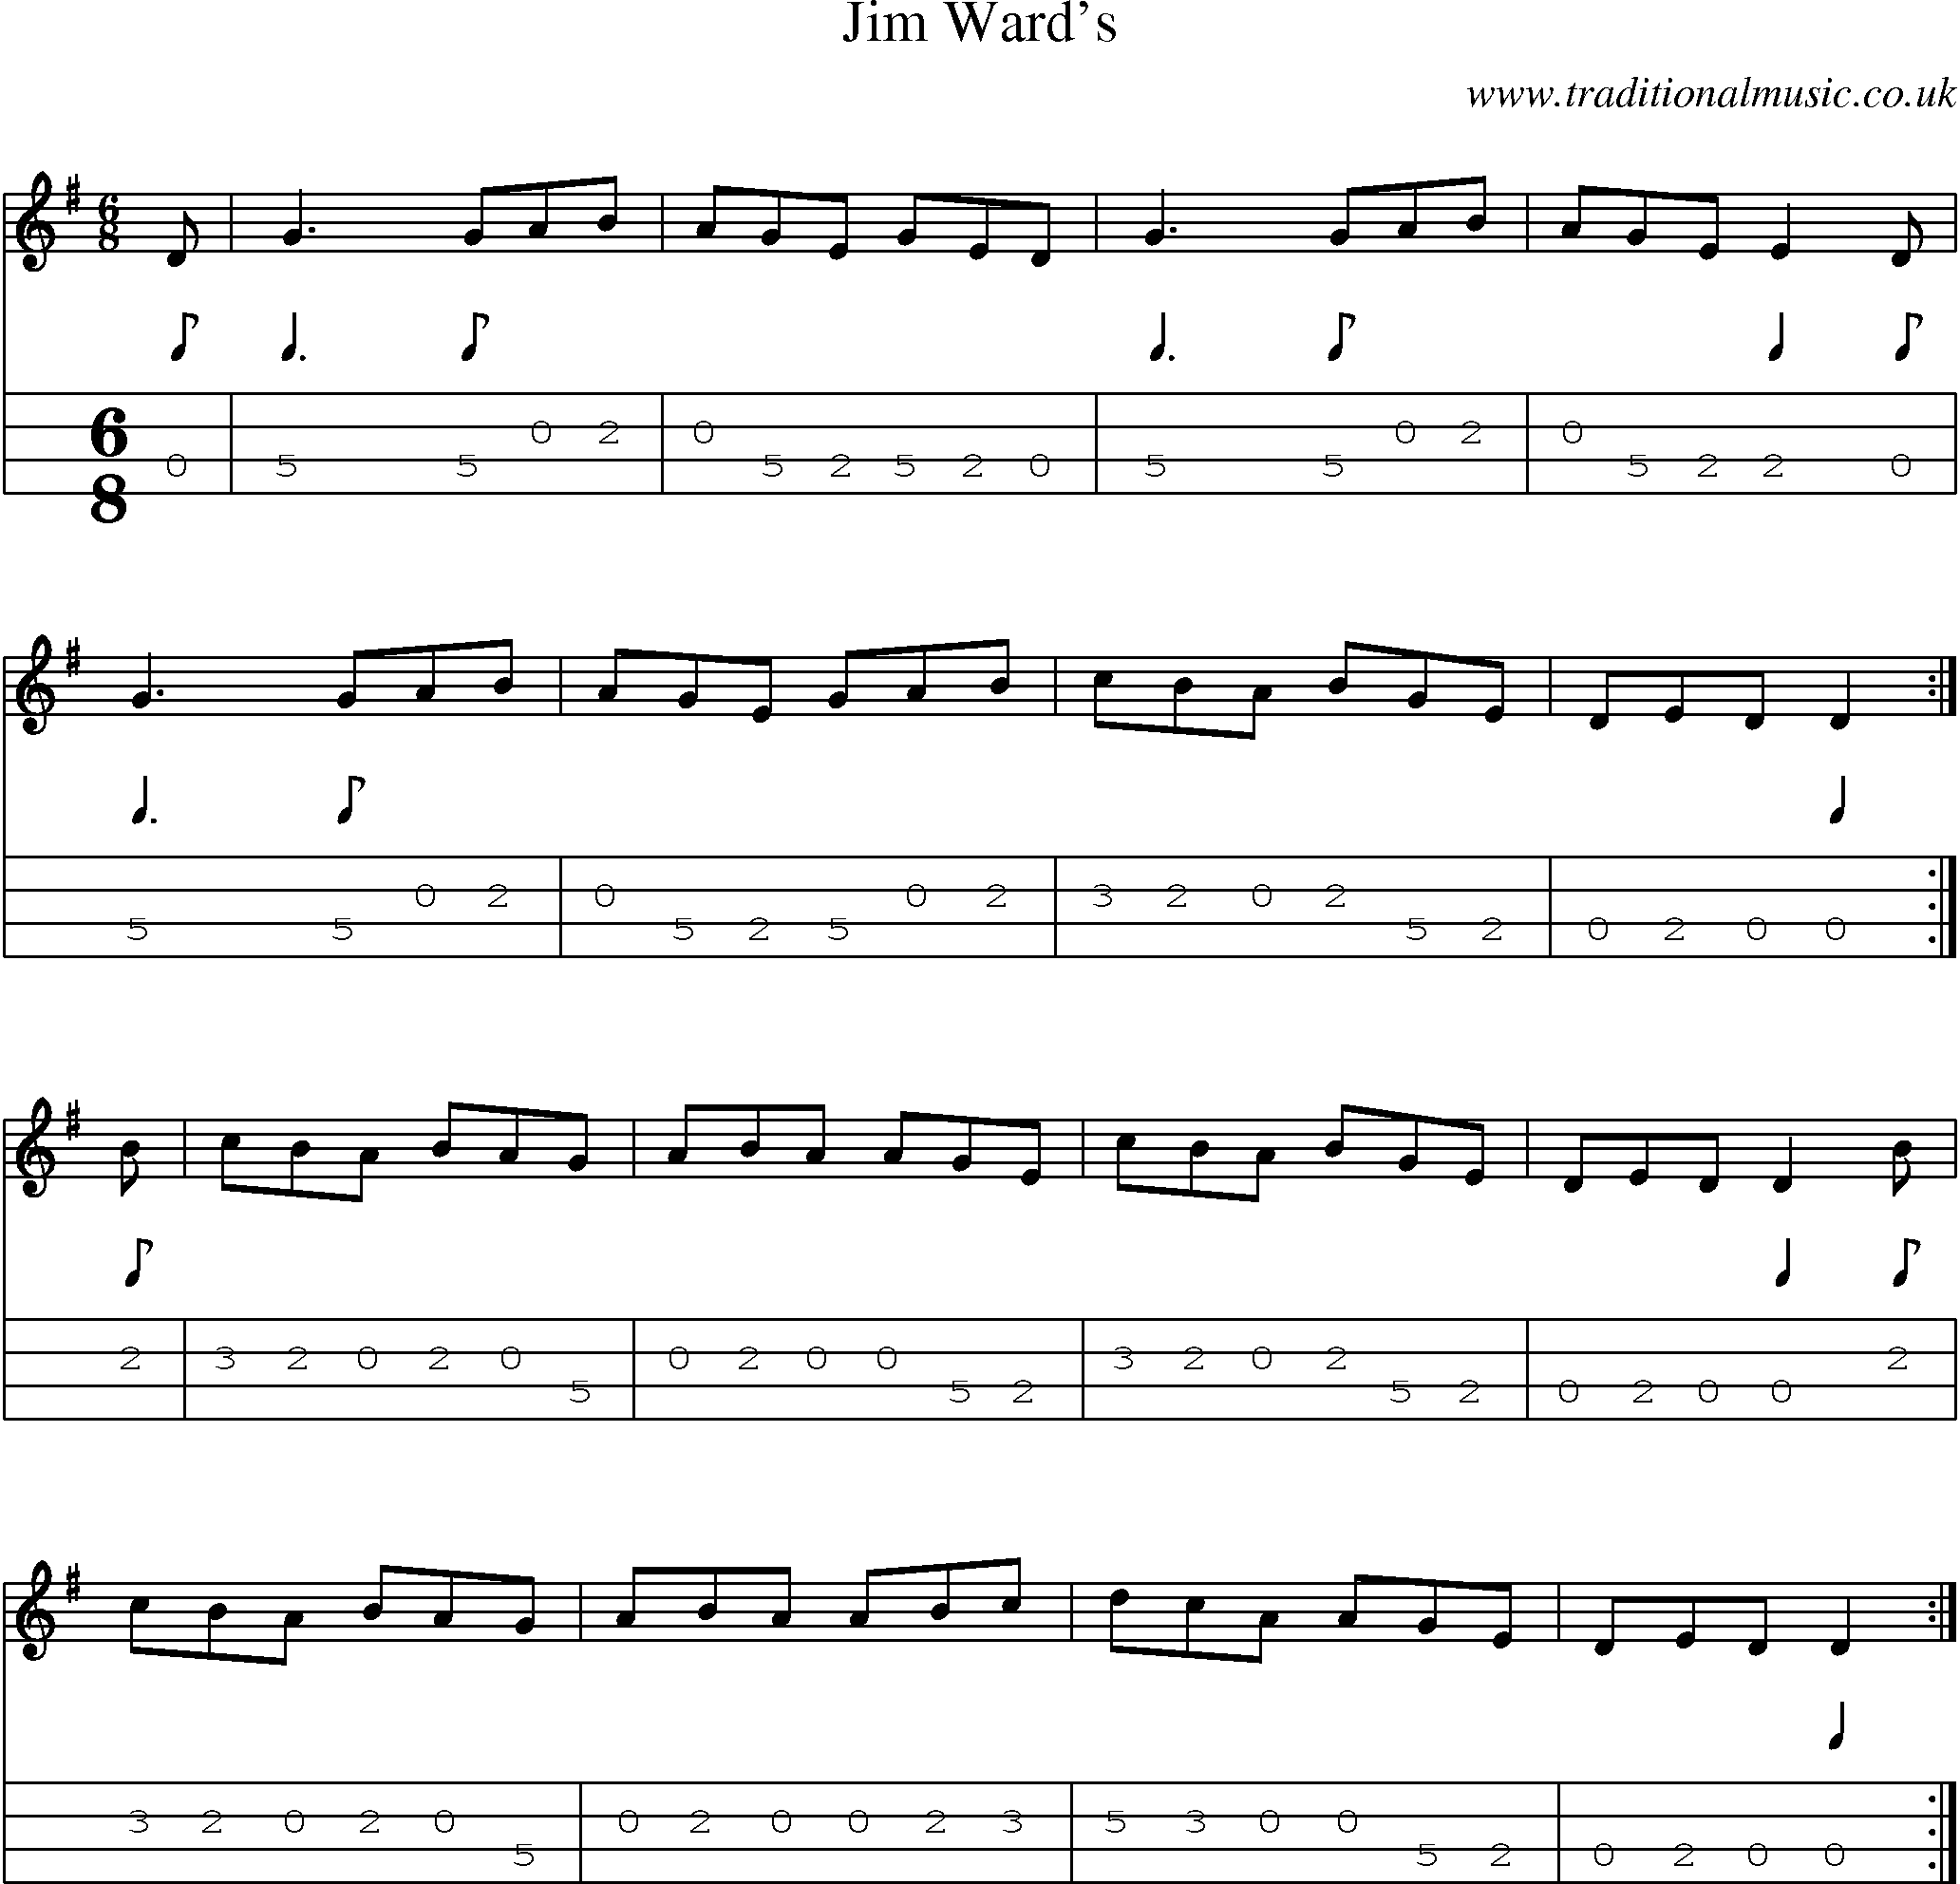 Music Score and Mandolin Tabs for Jim Wards